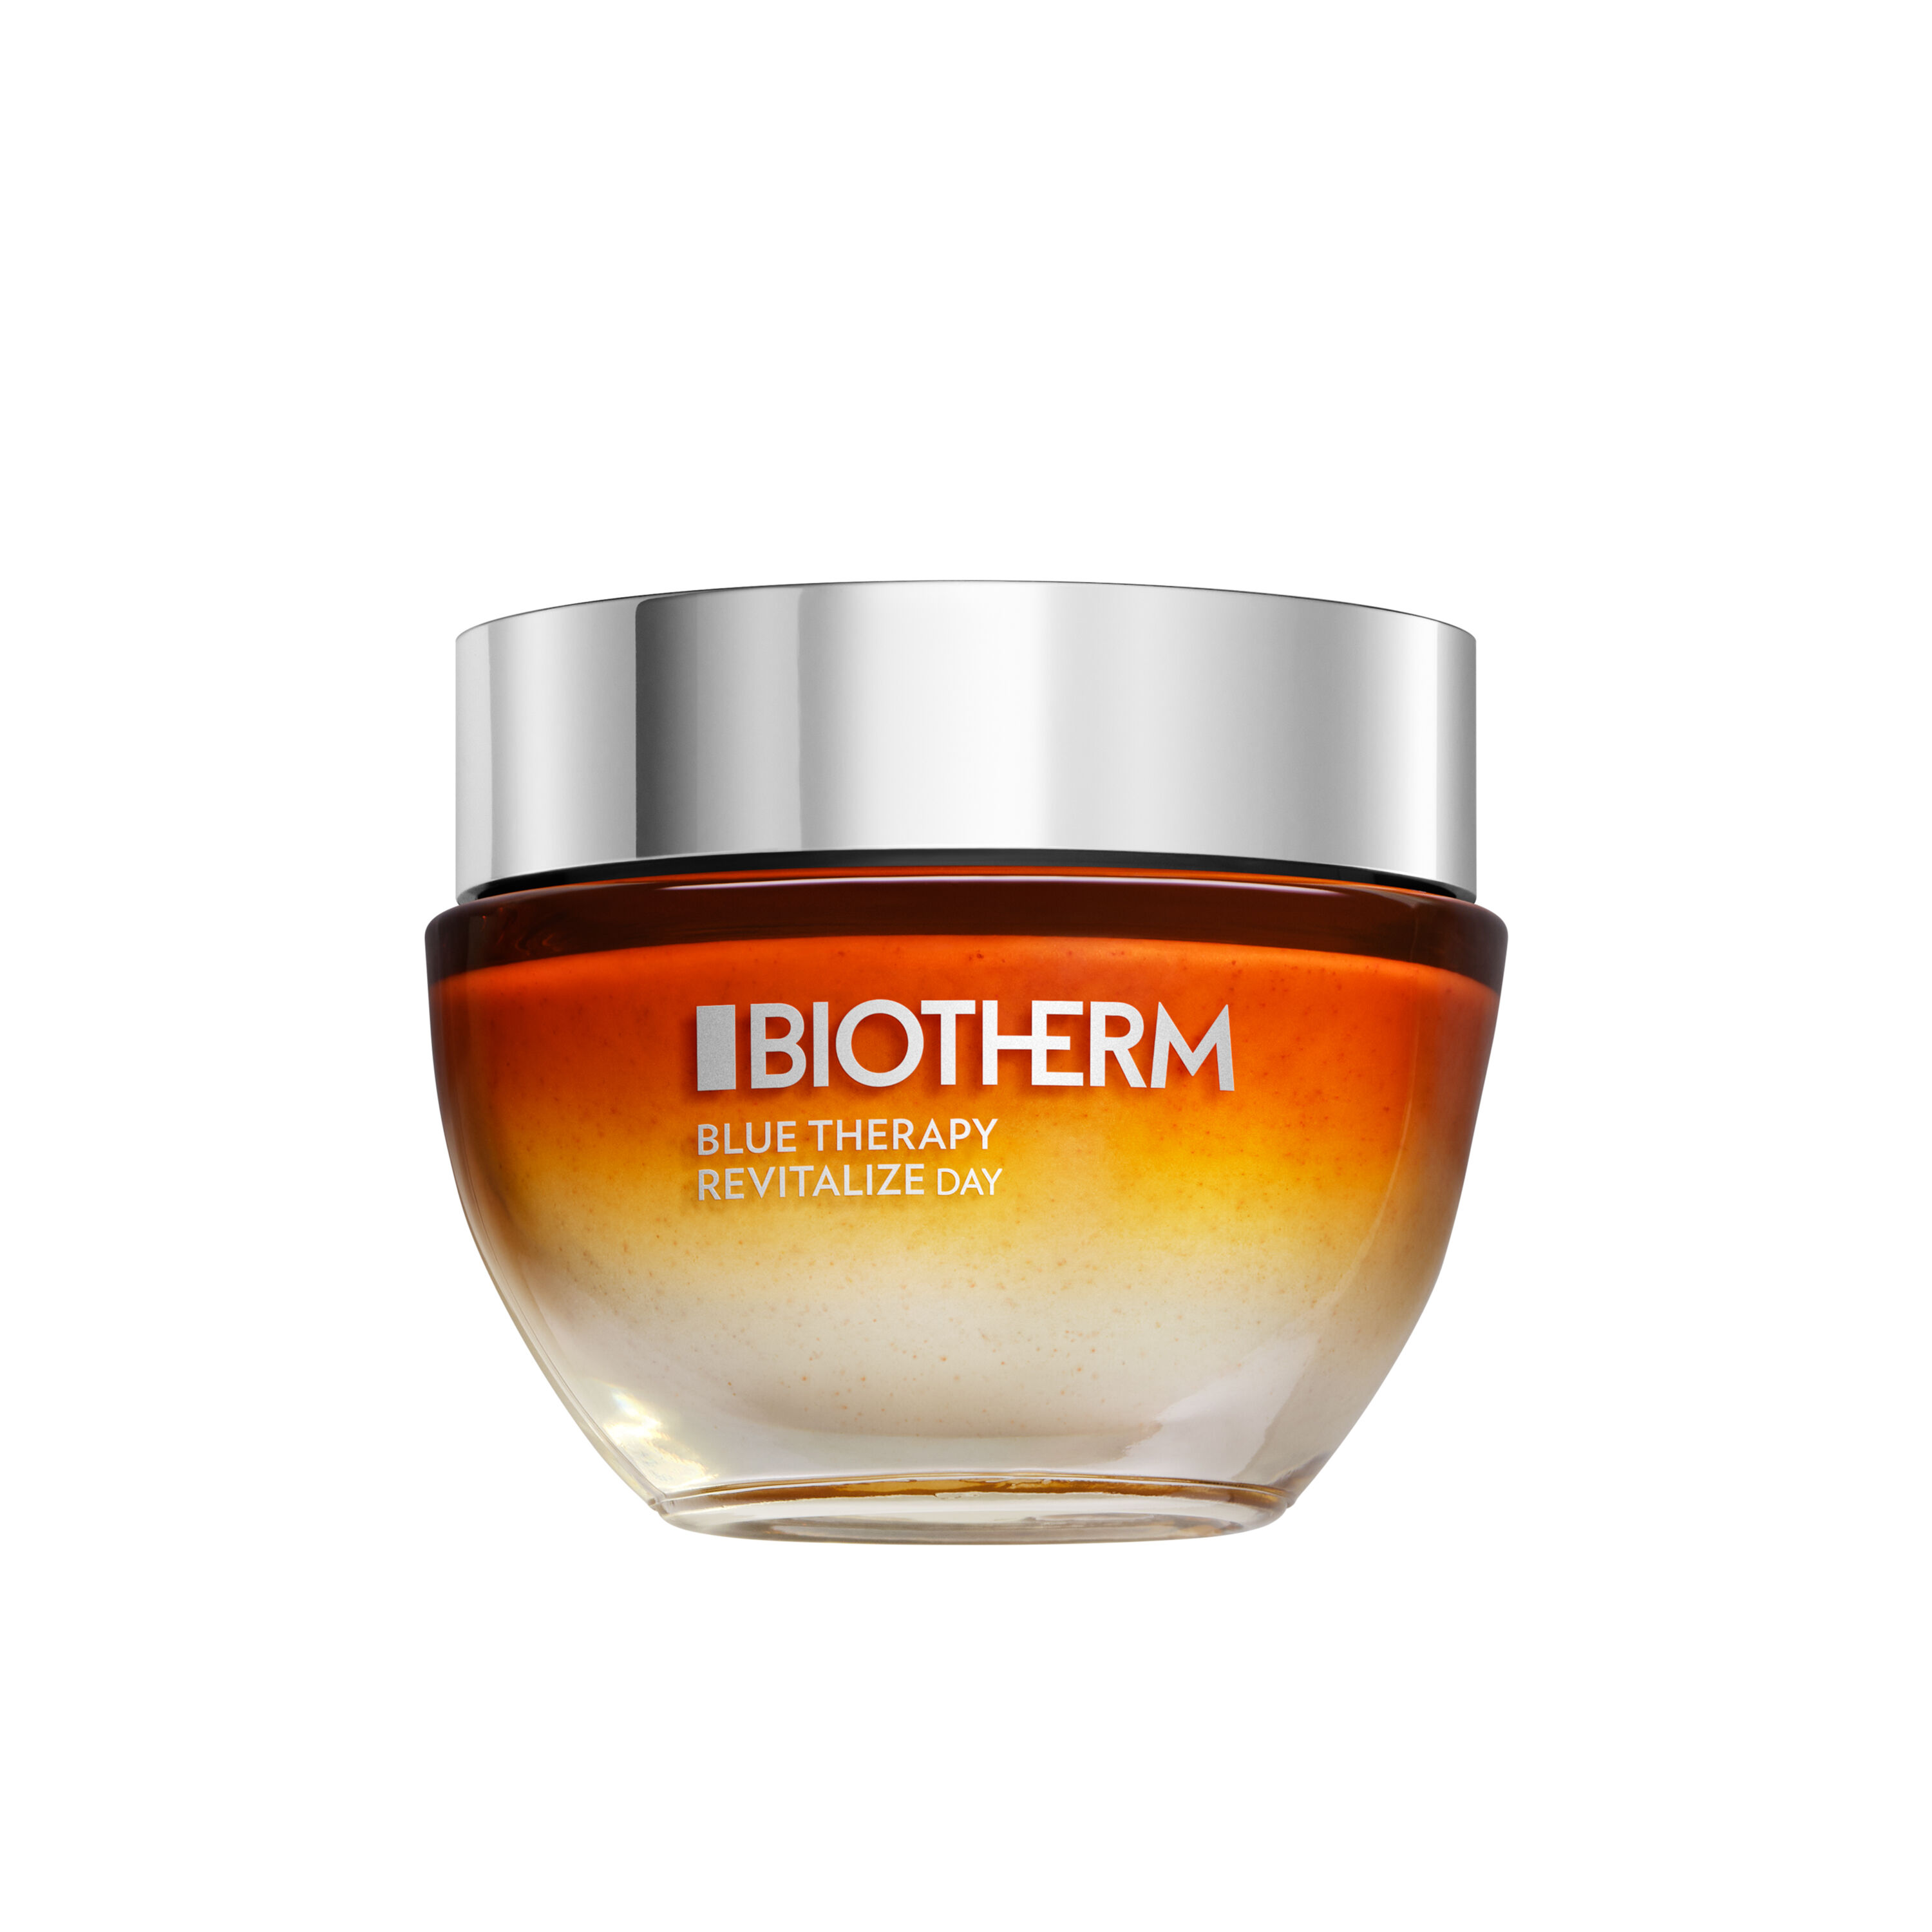 Day Therapy for Anti-Aging Blue All Revitalize Biotherm Skin Type Cream |